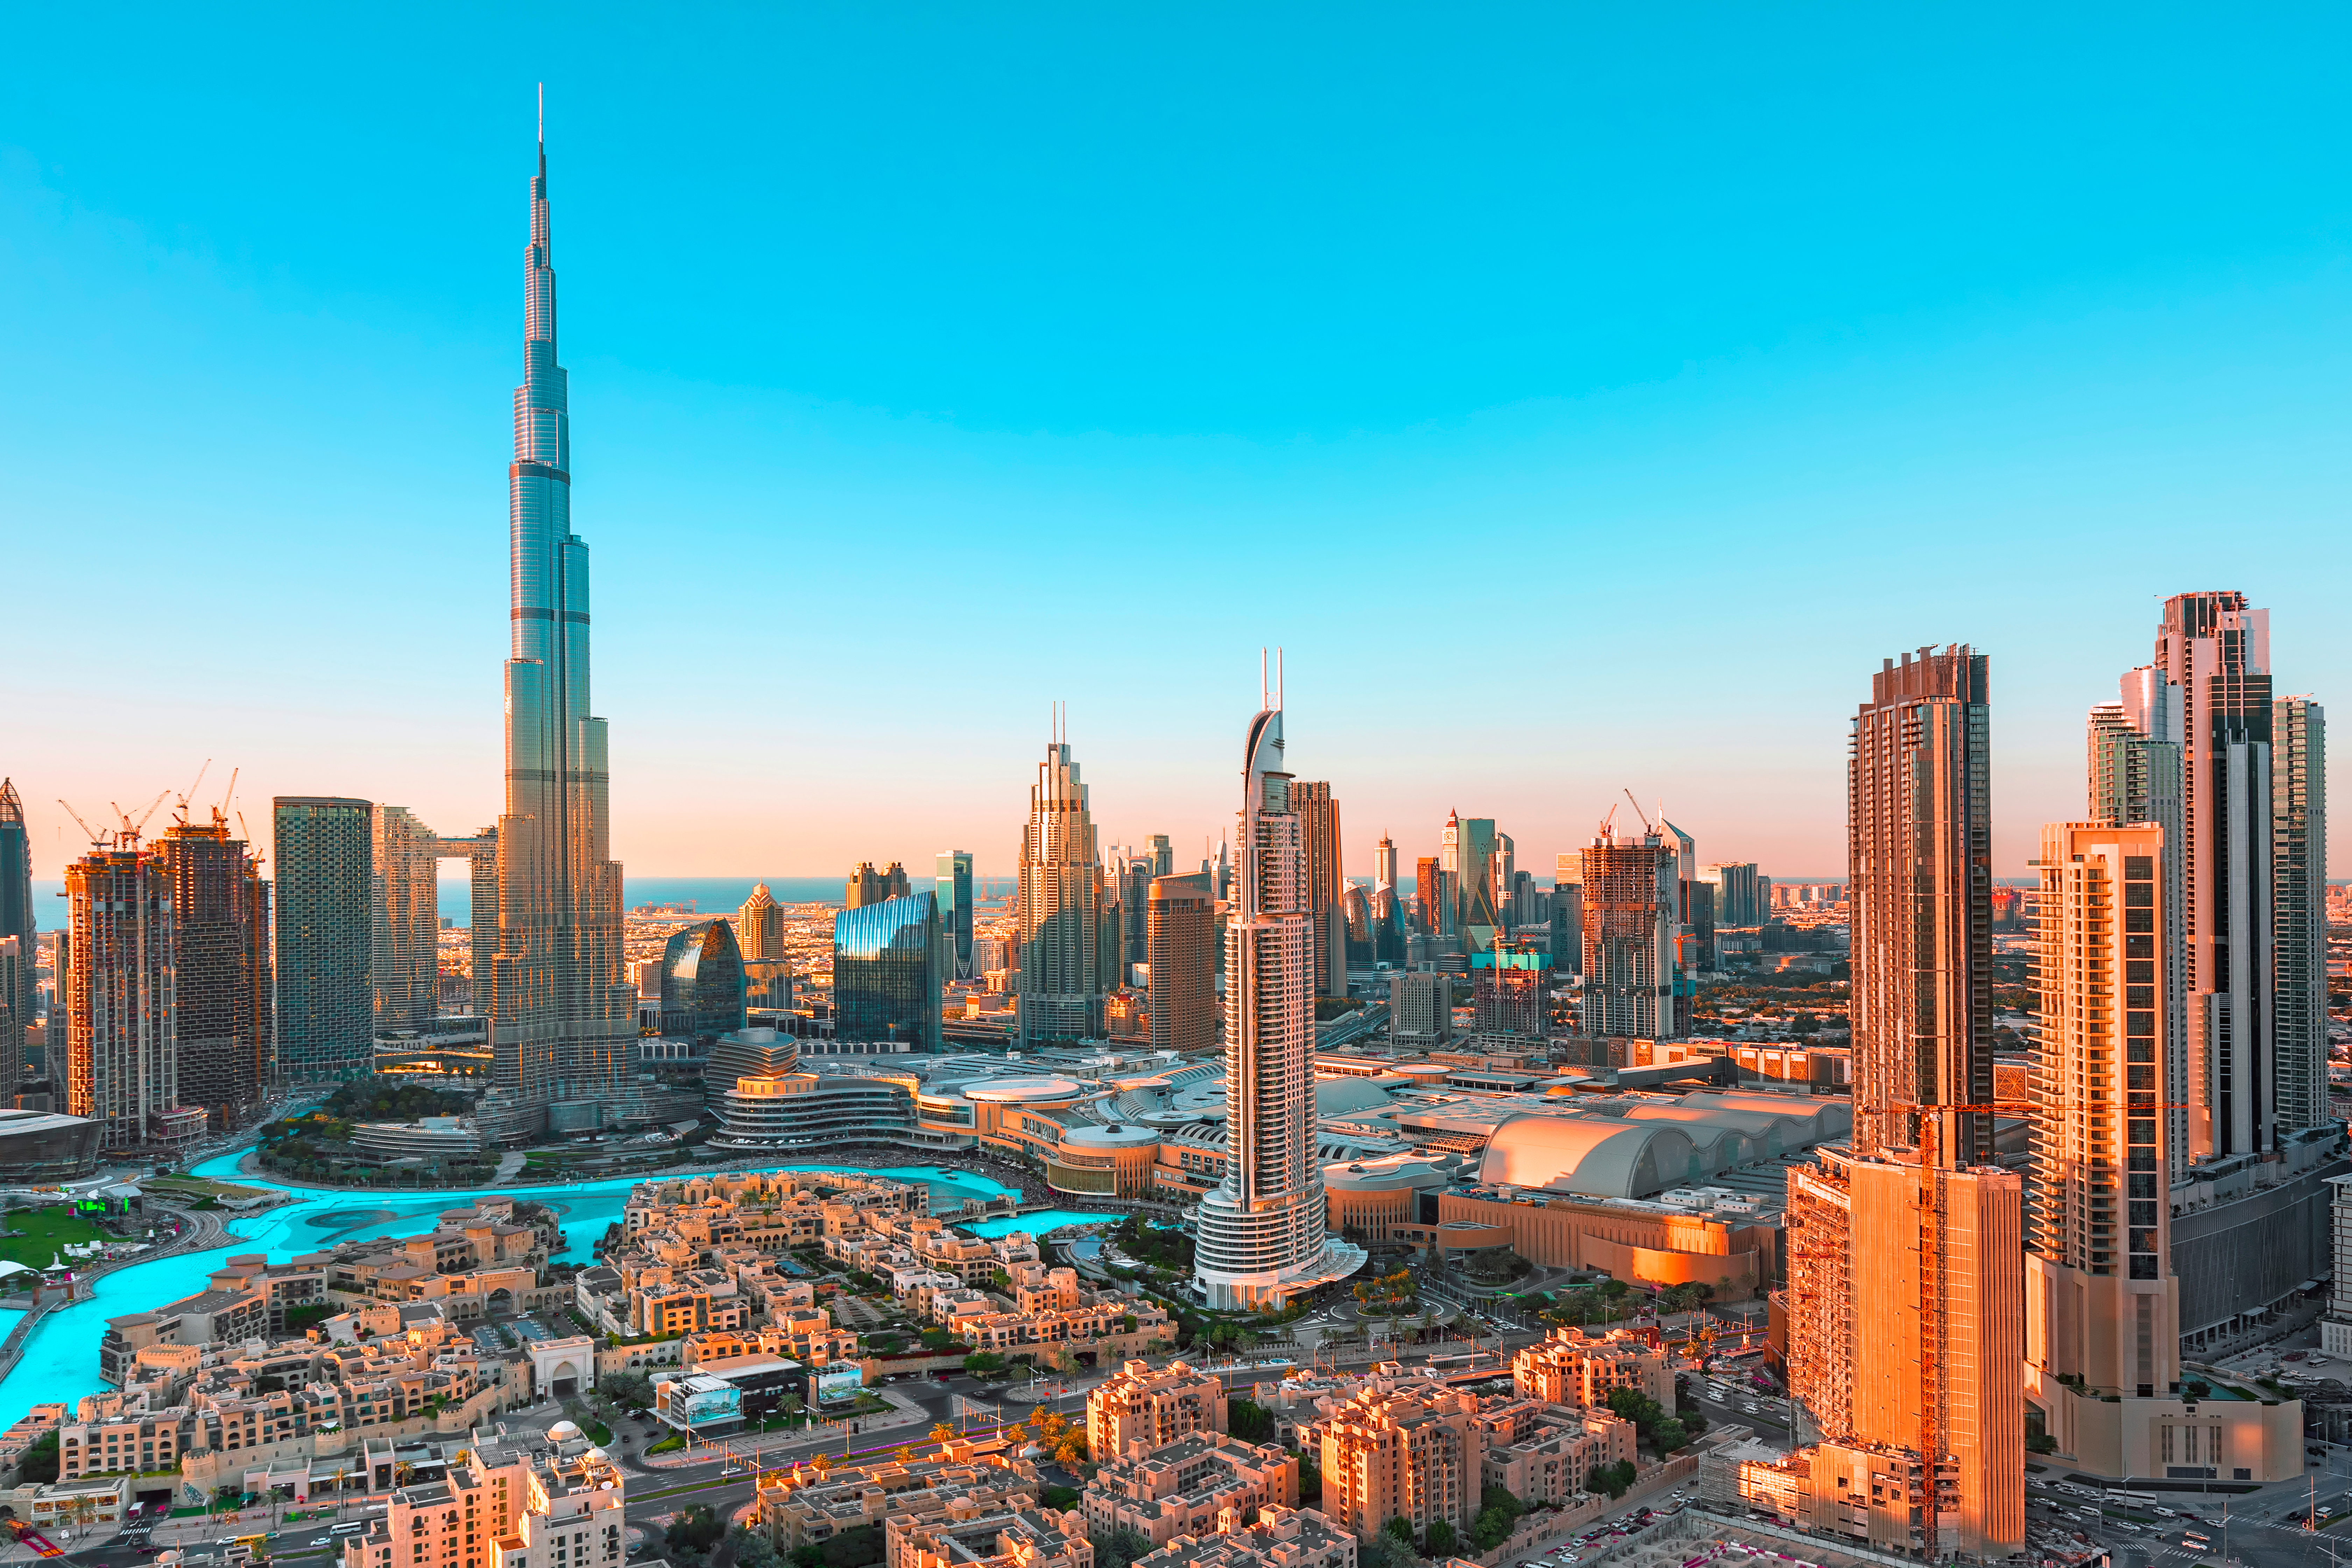 Prospects for the development of trusts in the UAE